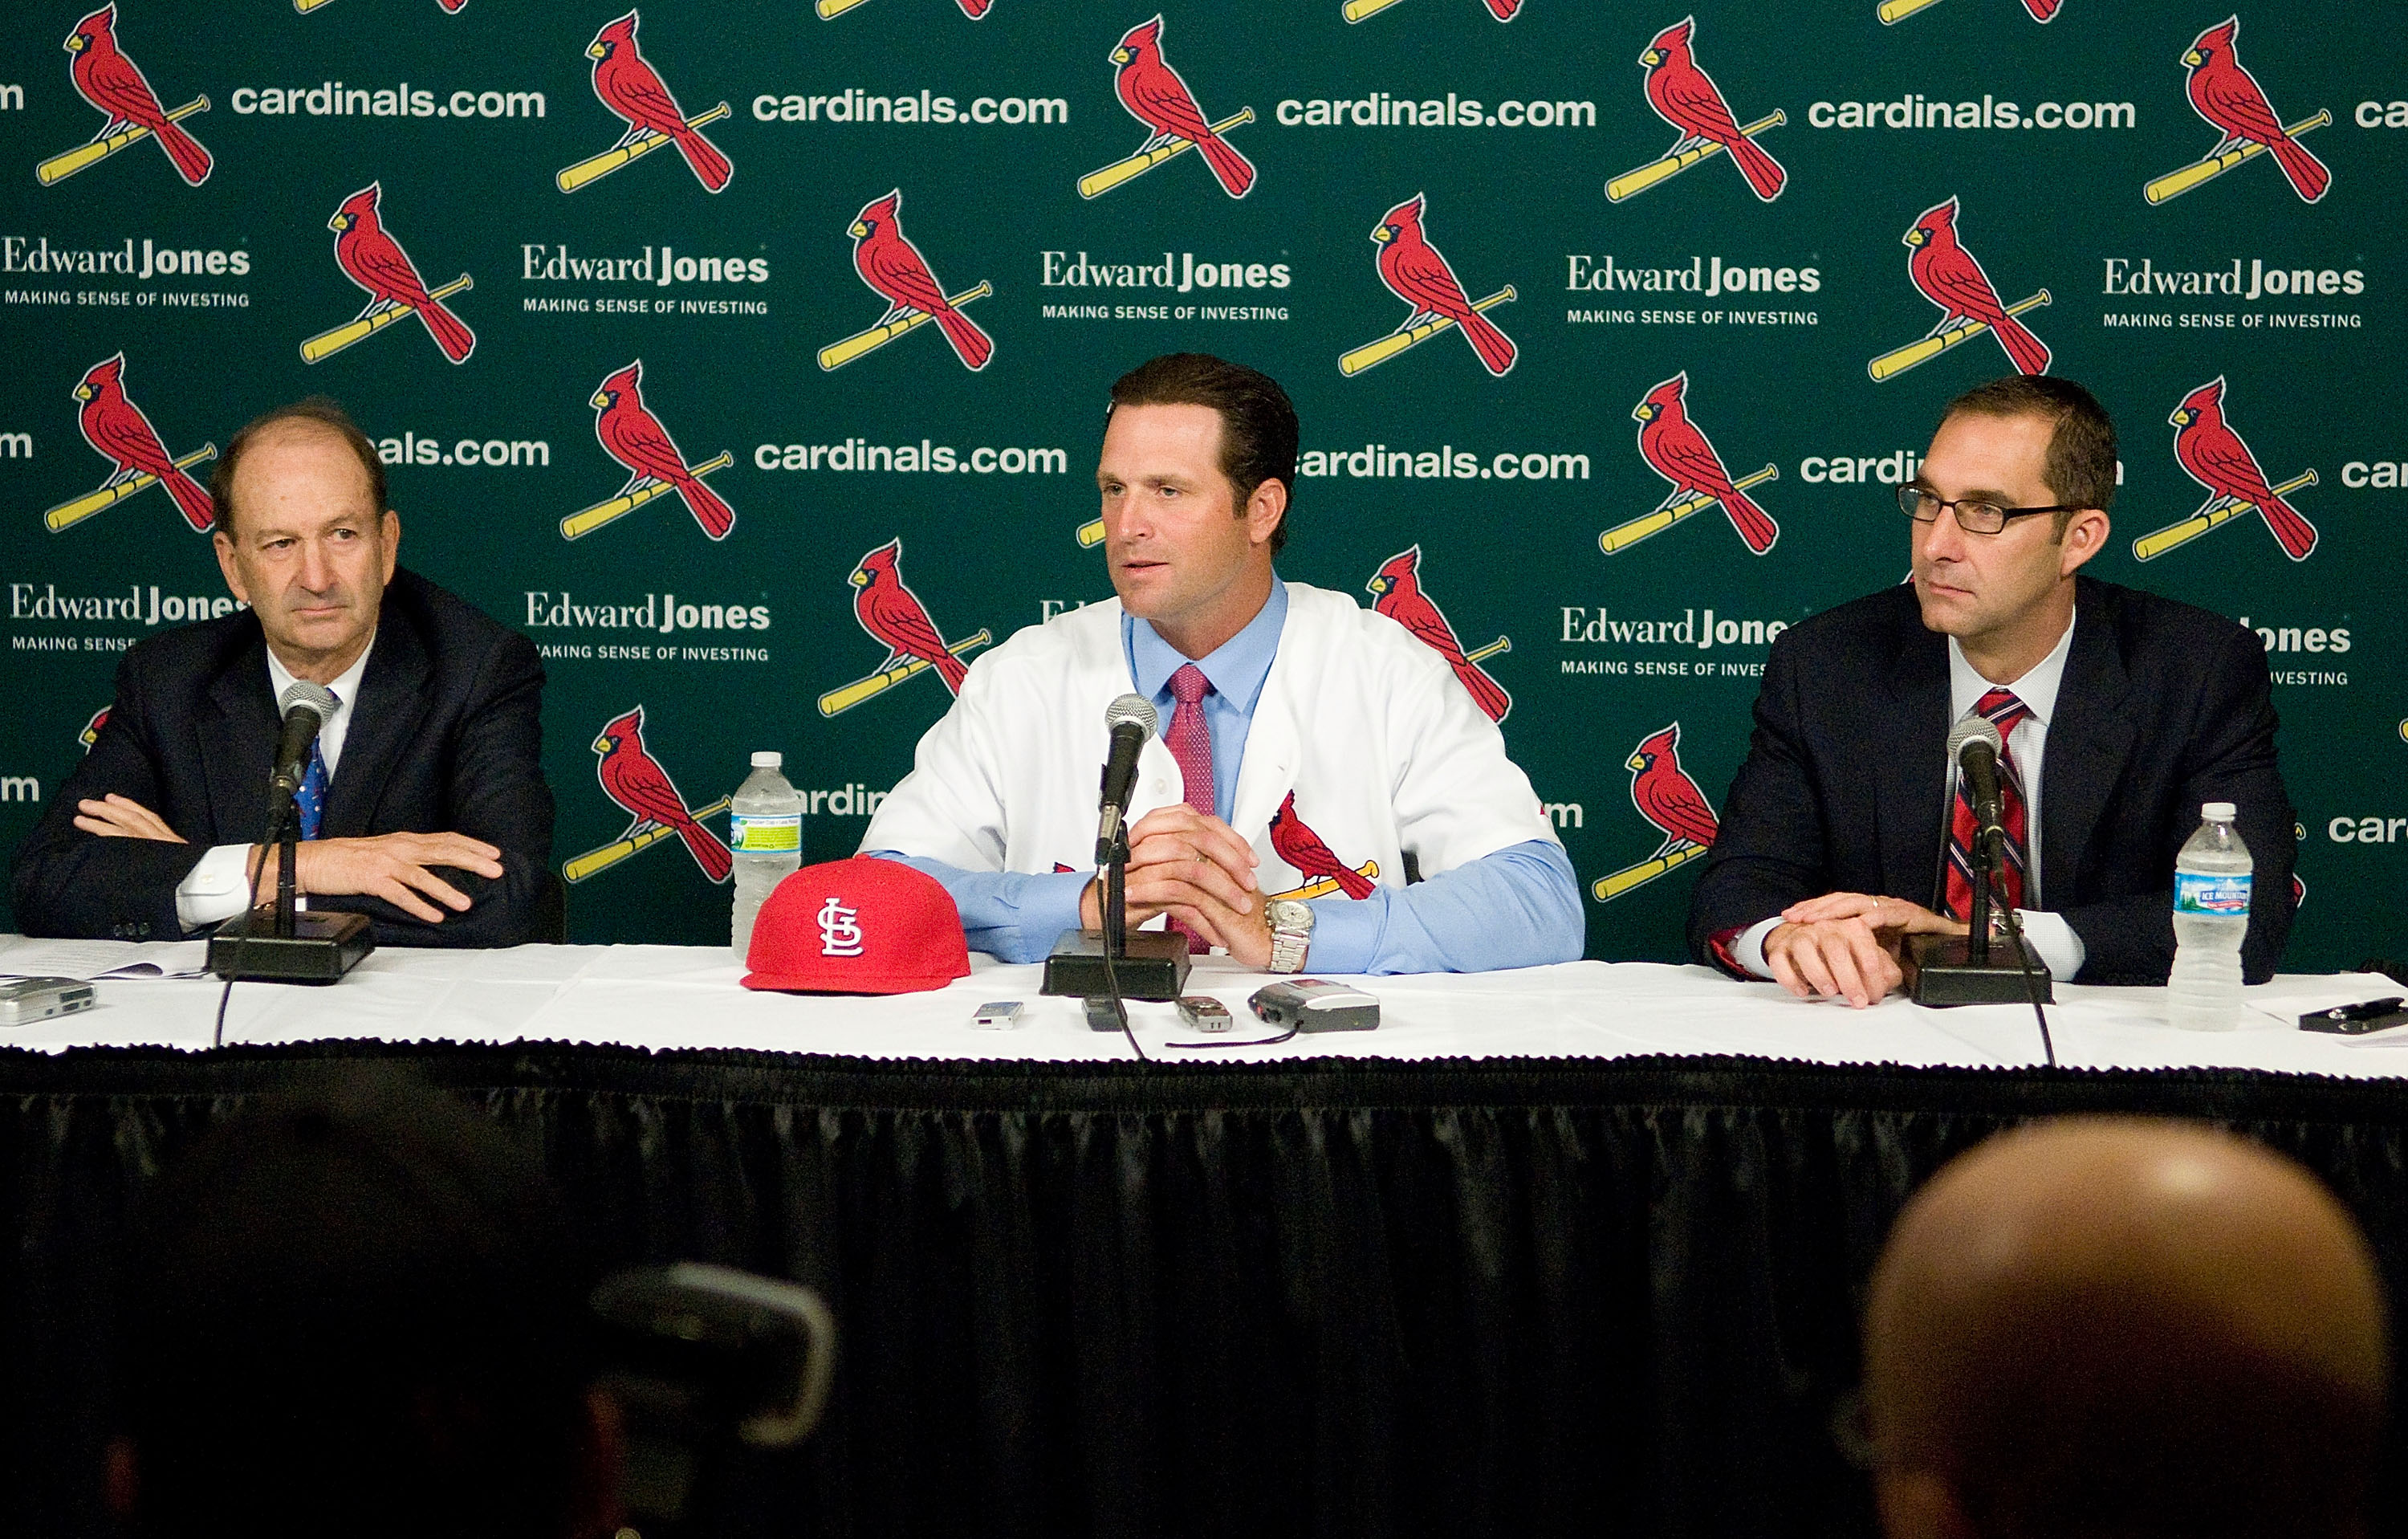 St. Louis Cardinals owner Bill Dewitt Jr., Mike Matheny, and general manager John Mozeliak talk during a press conference to announce Matheny as the new manager of the Cardinals at Busch Stadium on November 14, 2011. (Getty)